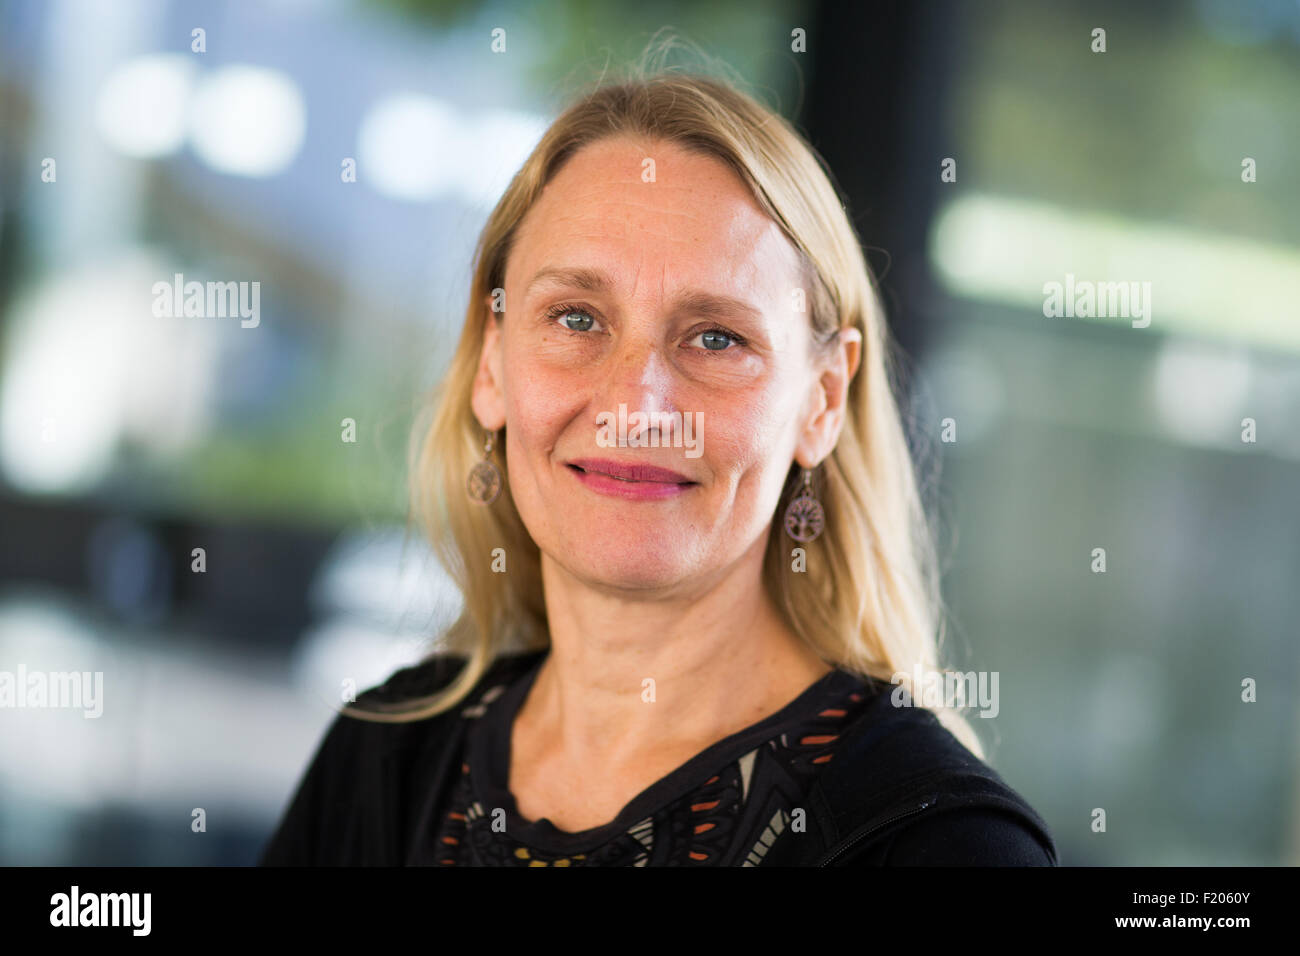 Wuppertal, Germany. 9th Sep, 2015. Australian dancer Julie Shanahan poses during a presentation of new plans for the dance theatre 'Pina Bausch' in Wuppertal, Germany, 9 September 2015. The world famous dance theatre Pina Bausch will bring new pieces to the stage 18 September 2015. PHOTO: ROLF VENNENBERND/dpa/Alamy Live News Stock Photo